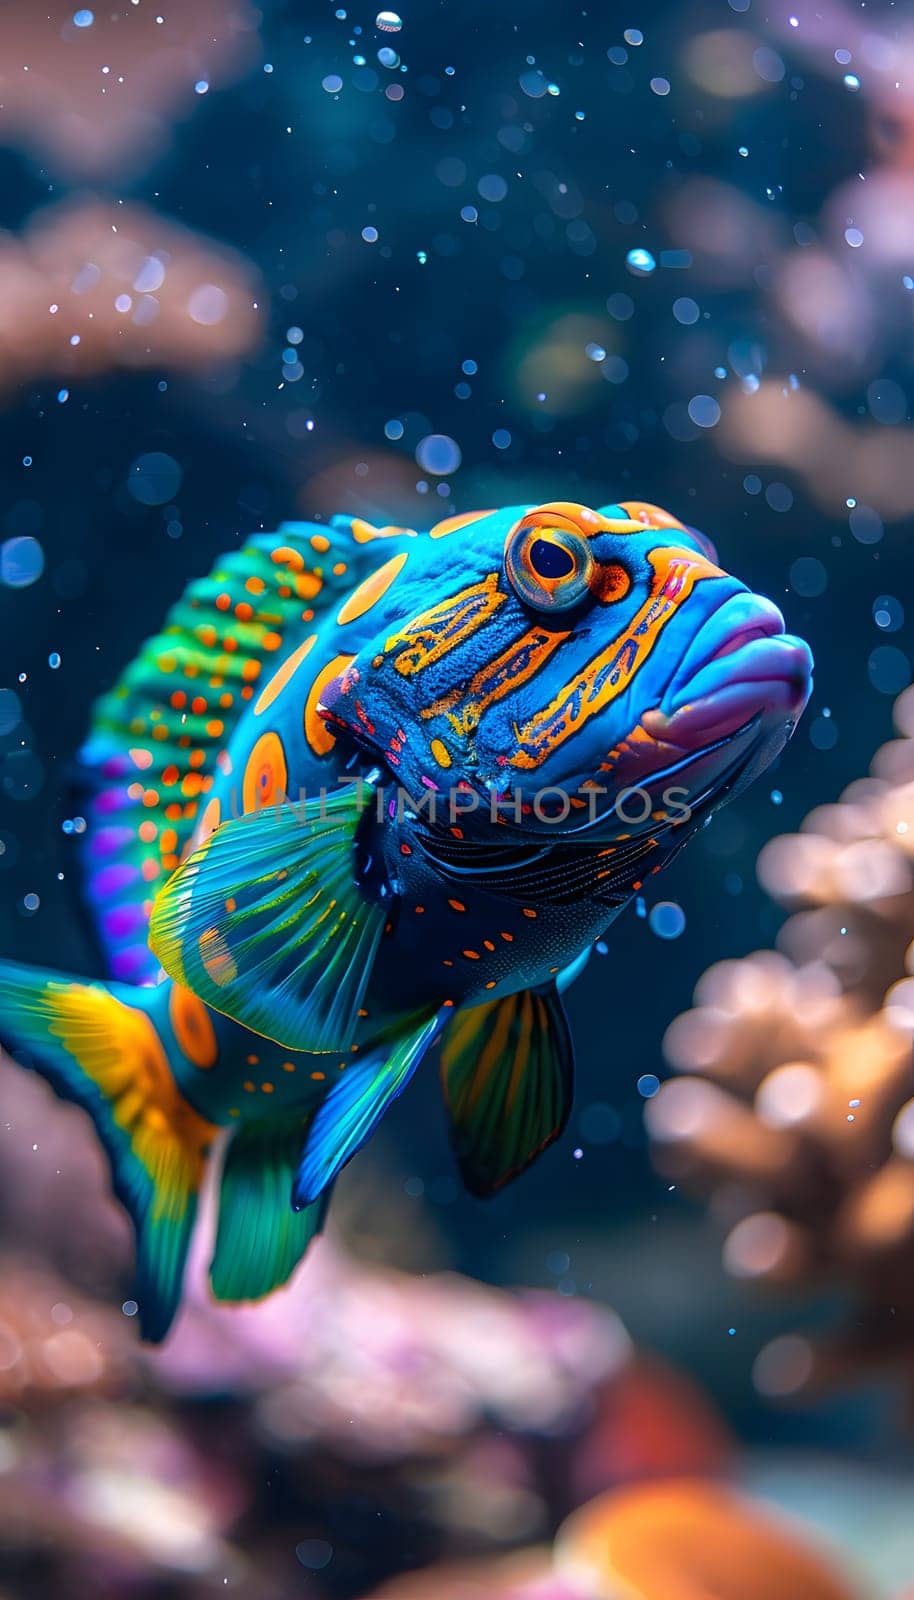 An electric blue fish is gracefully swimming in the underwater natural environment near a coral reef, showcasing the beauty of marine biology